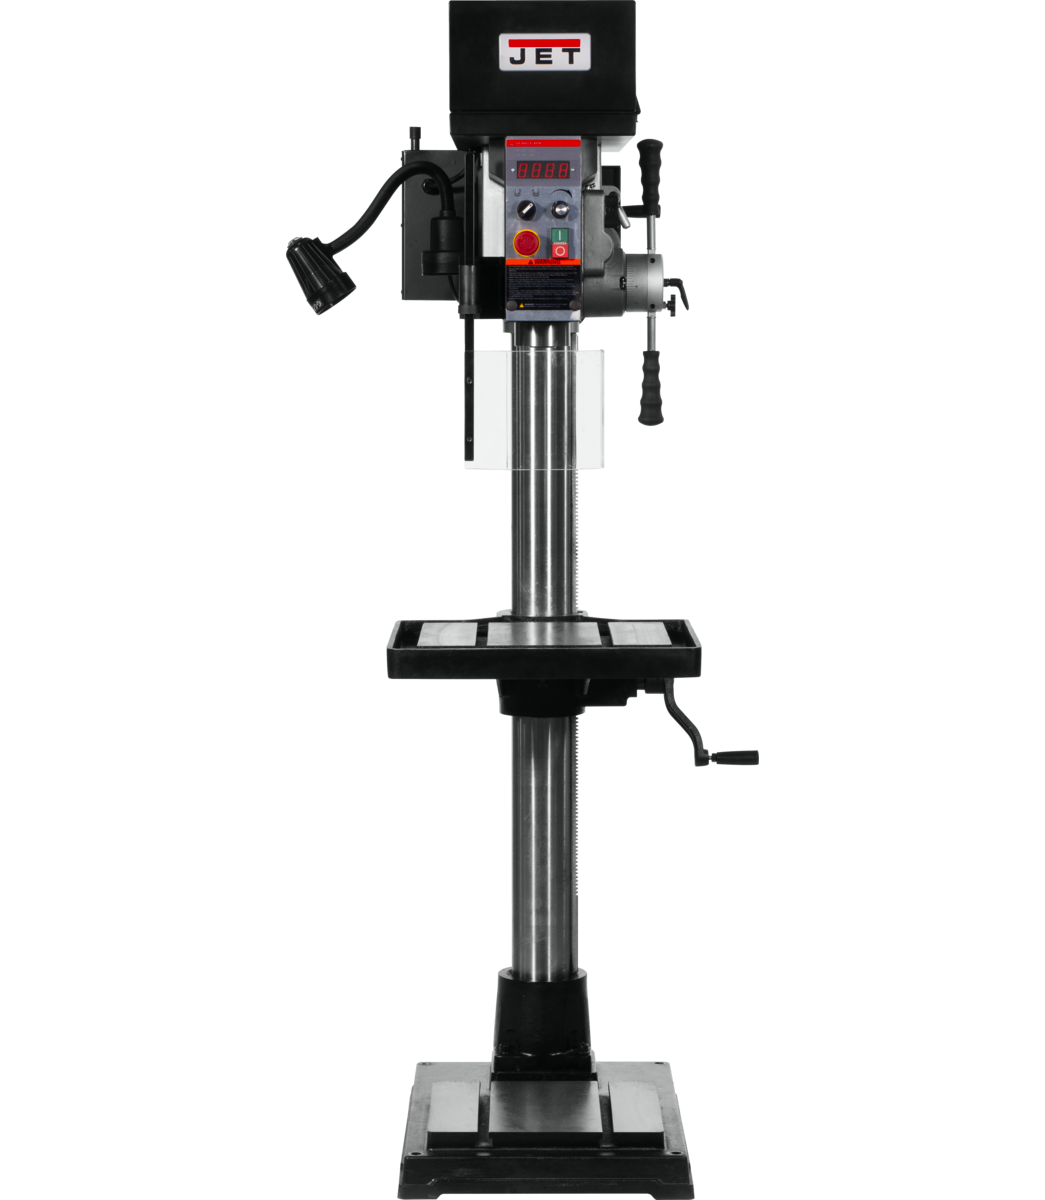 JDPE-20EVS-PDF 20" EVS Drill Press with Power Downfeed  1-1/2HP, 115V, Single Phase